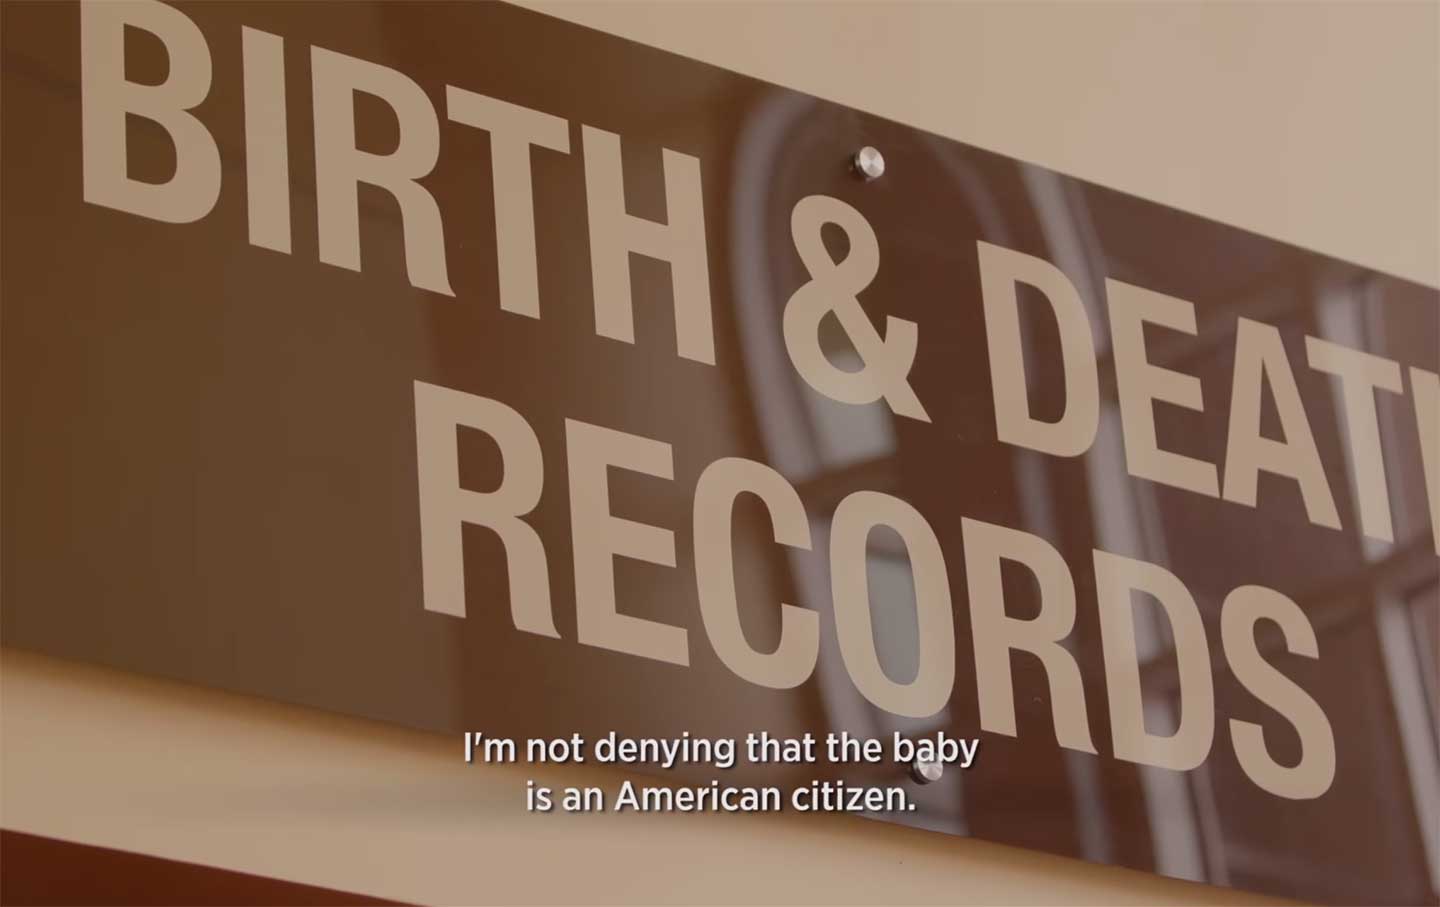 Getting a Birth Certificate For a US Citizen Should Be Easy. If You’re an Immigrant Mother, It’s Not.